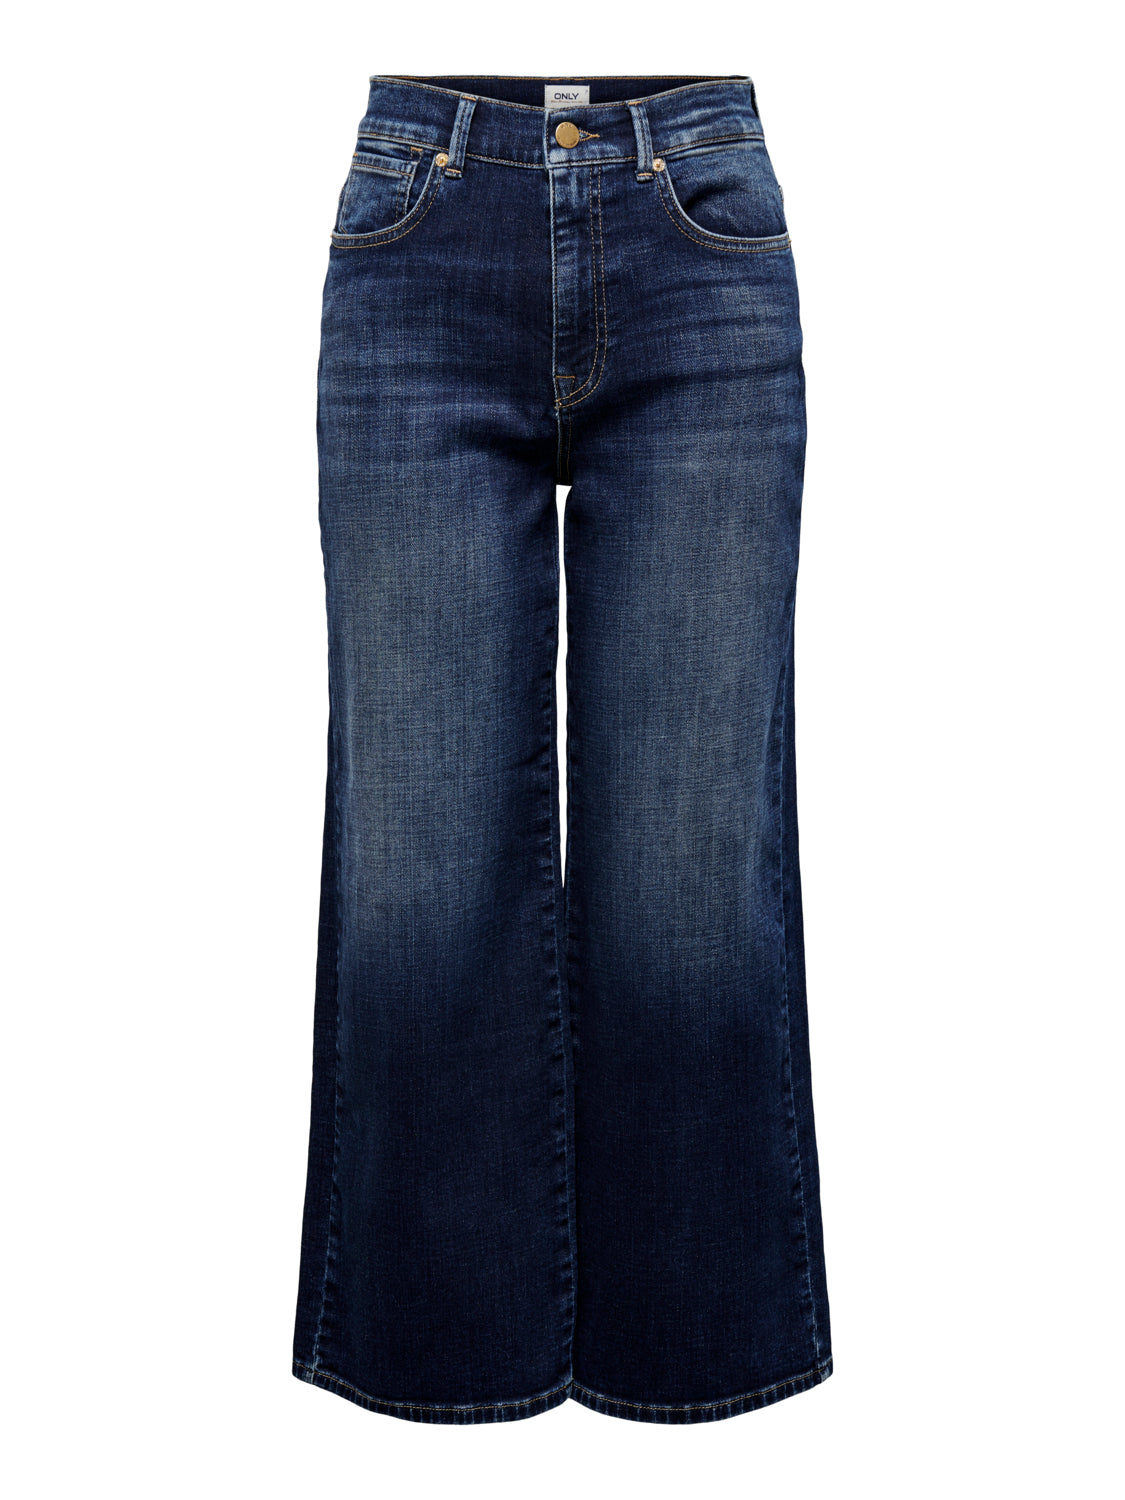 MADISON WIDE CROP JEANS